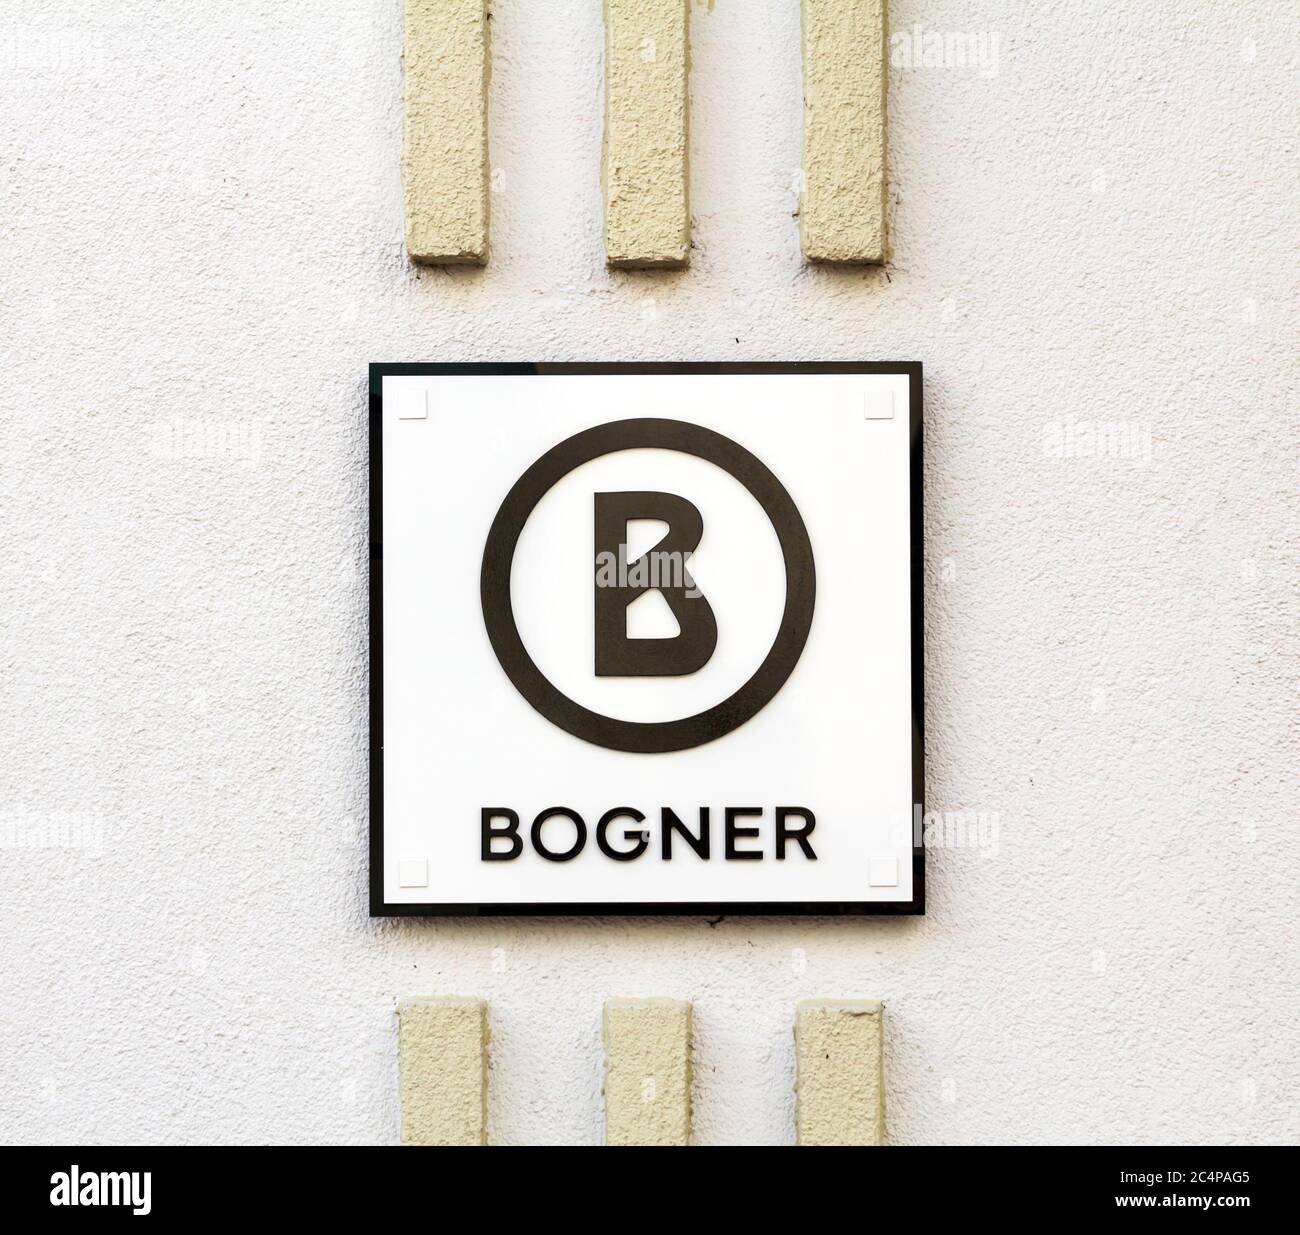 Ingolstadt, GERMANY : BOGNER fashion outlet store, Bogner-exclusive brand  for men and women's fashion Stock Photo - Alamy